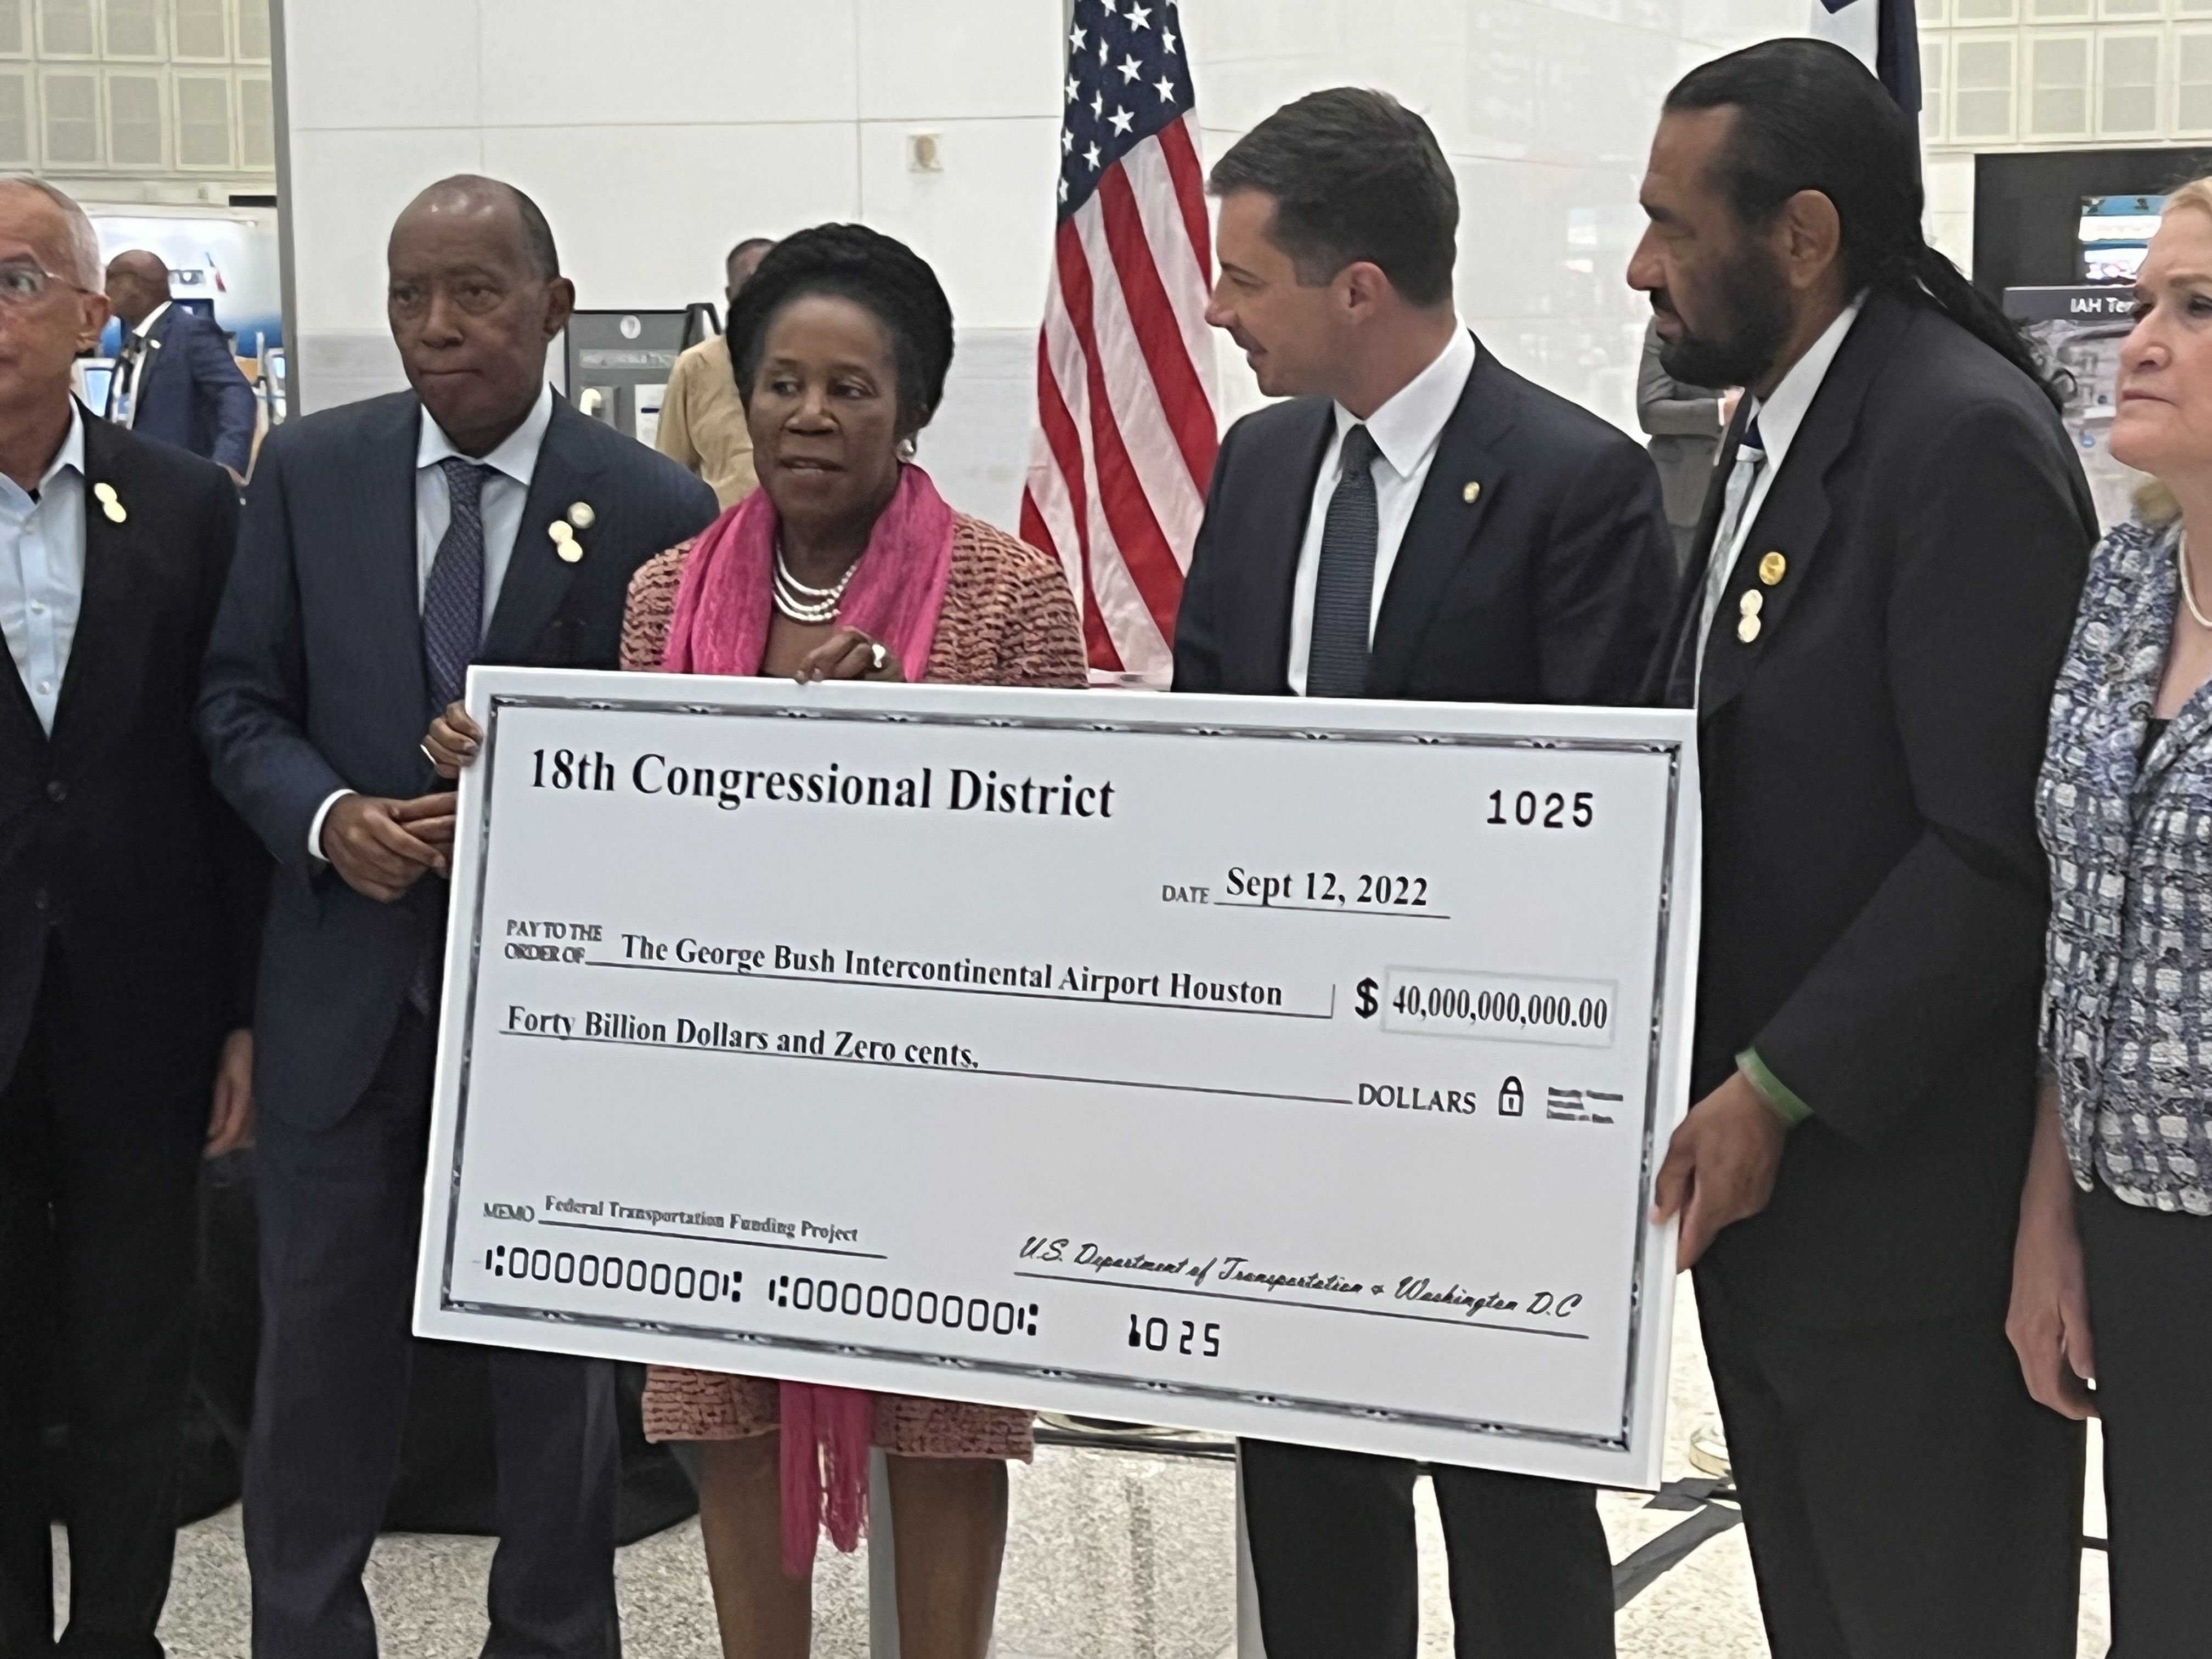 Mayor Sylvester Turner, U.S. Rep. Sheila Jackson Lee and Transportation Secretary Pete Butigieg hold a giant check in front of an American flag